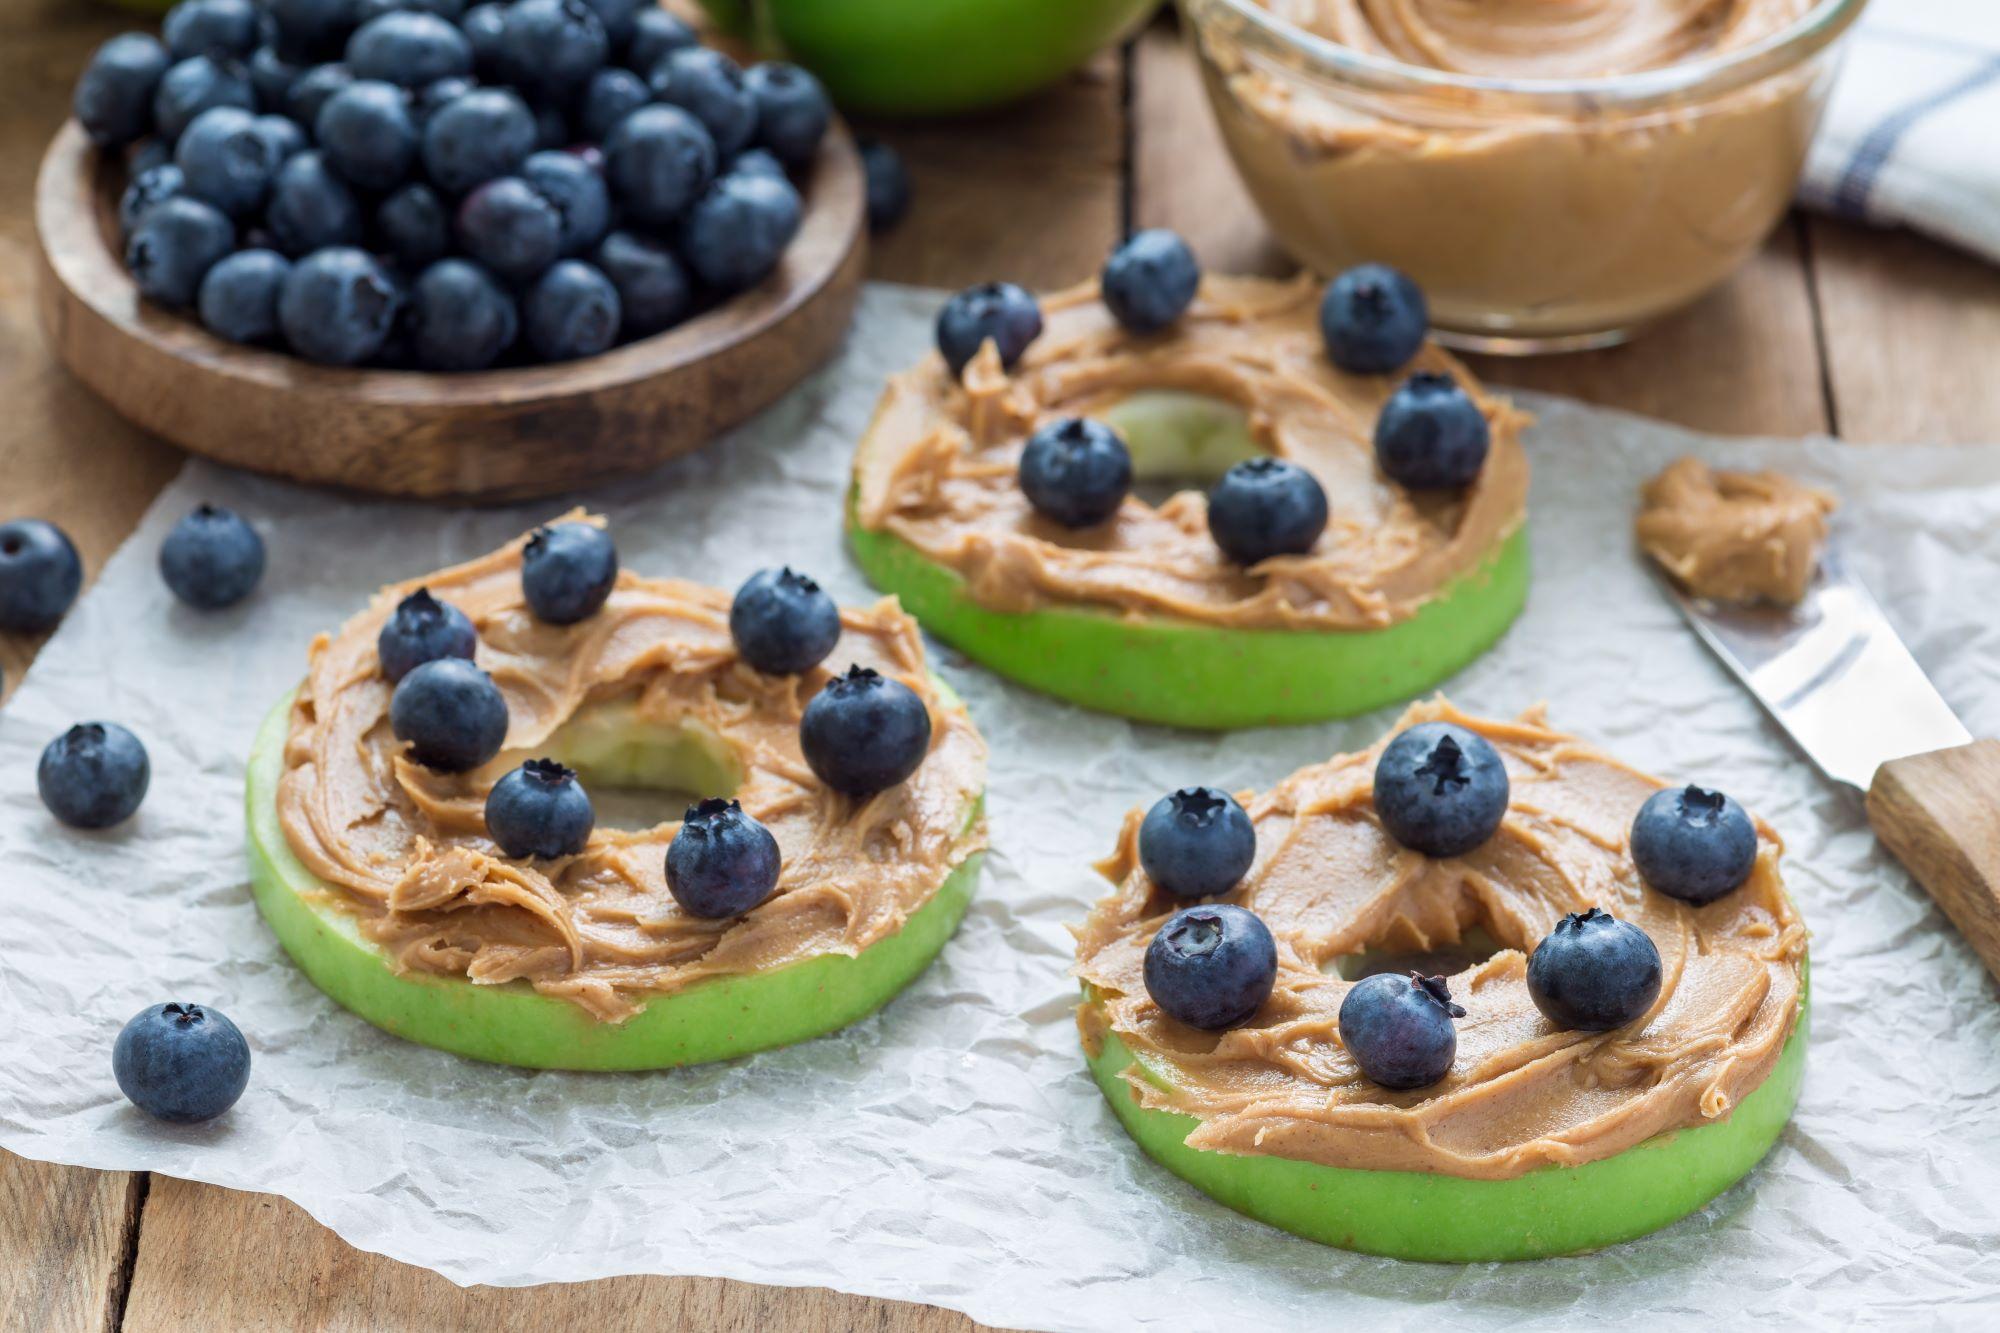 Green apples sliced and topped with peanut butter and blueberries.